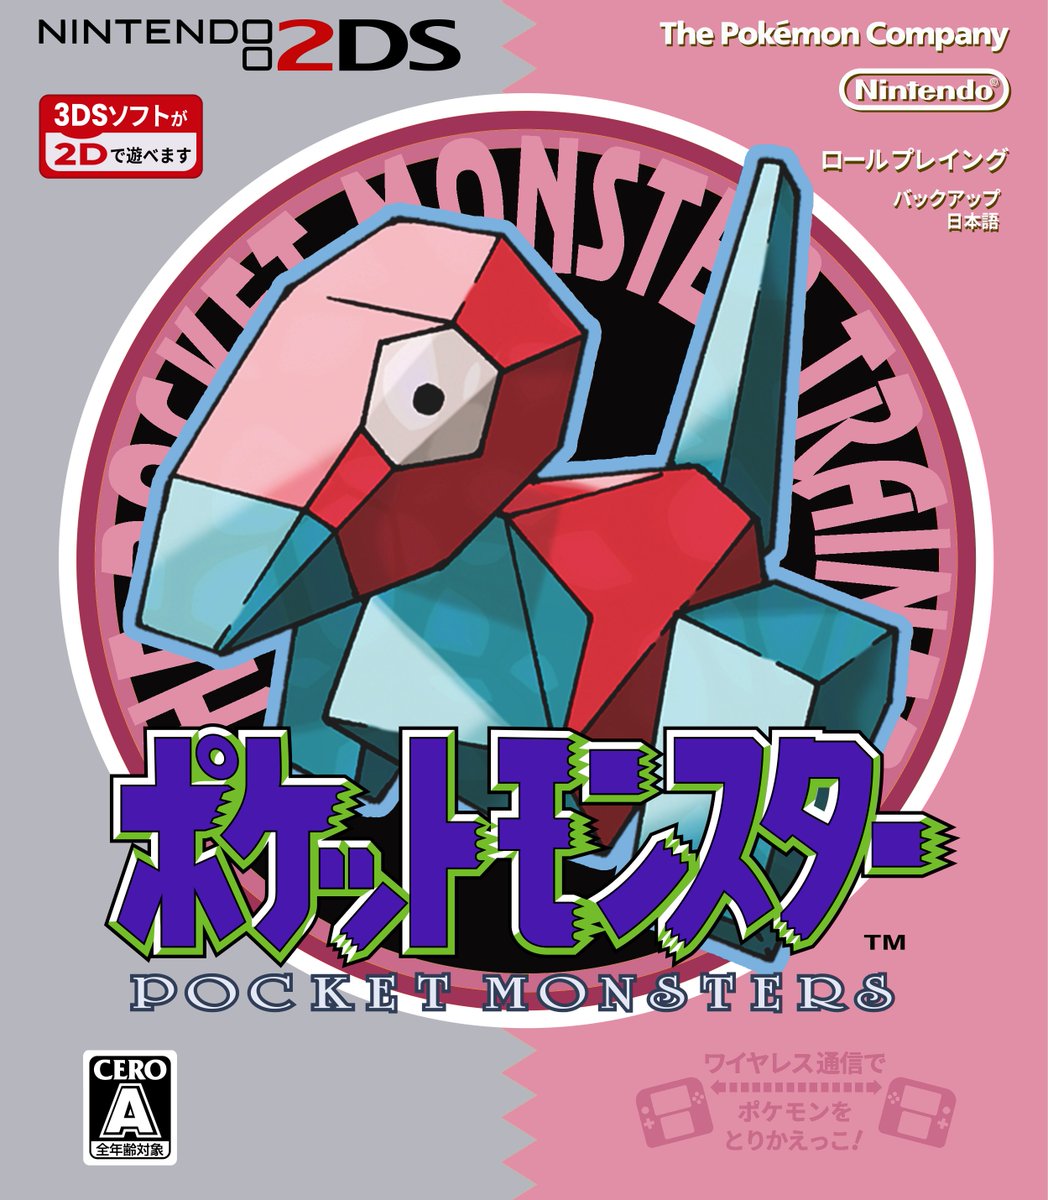 Made a Porygon one for my friend @OoCPokemon ! :D This is the fourth limited edition 2ds mock-up I've made together with @rocketgruntyuno and we have a few more planned for this weekend 🥰💖 Who should we do next?